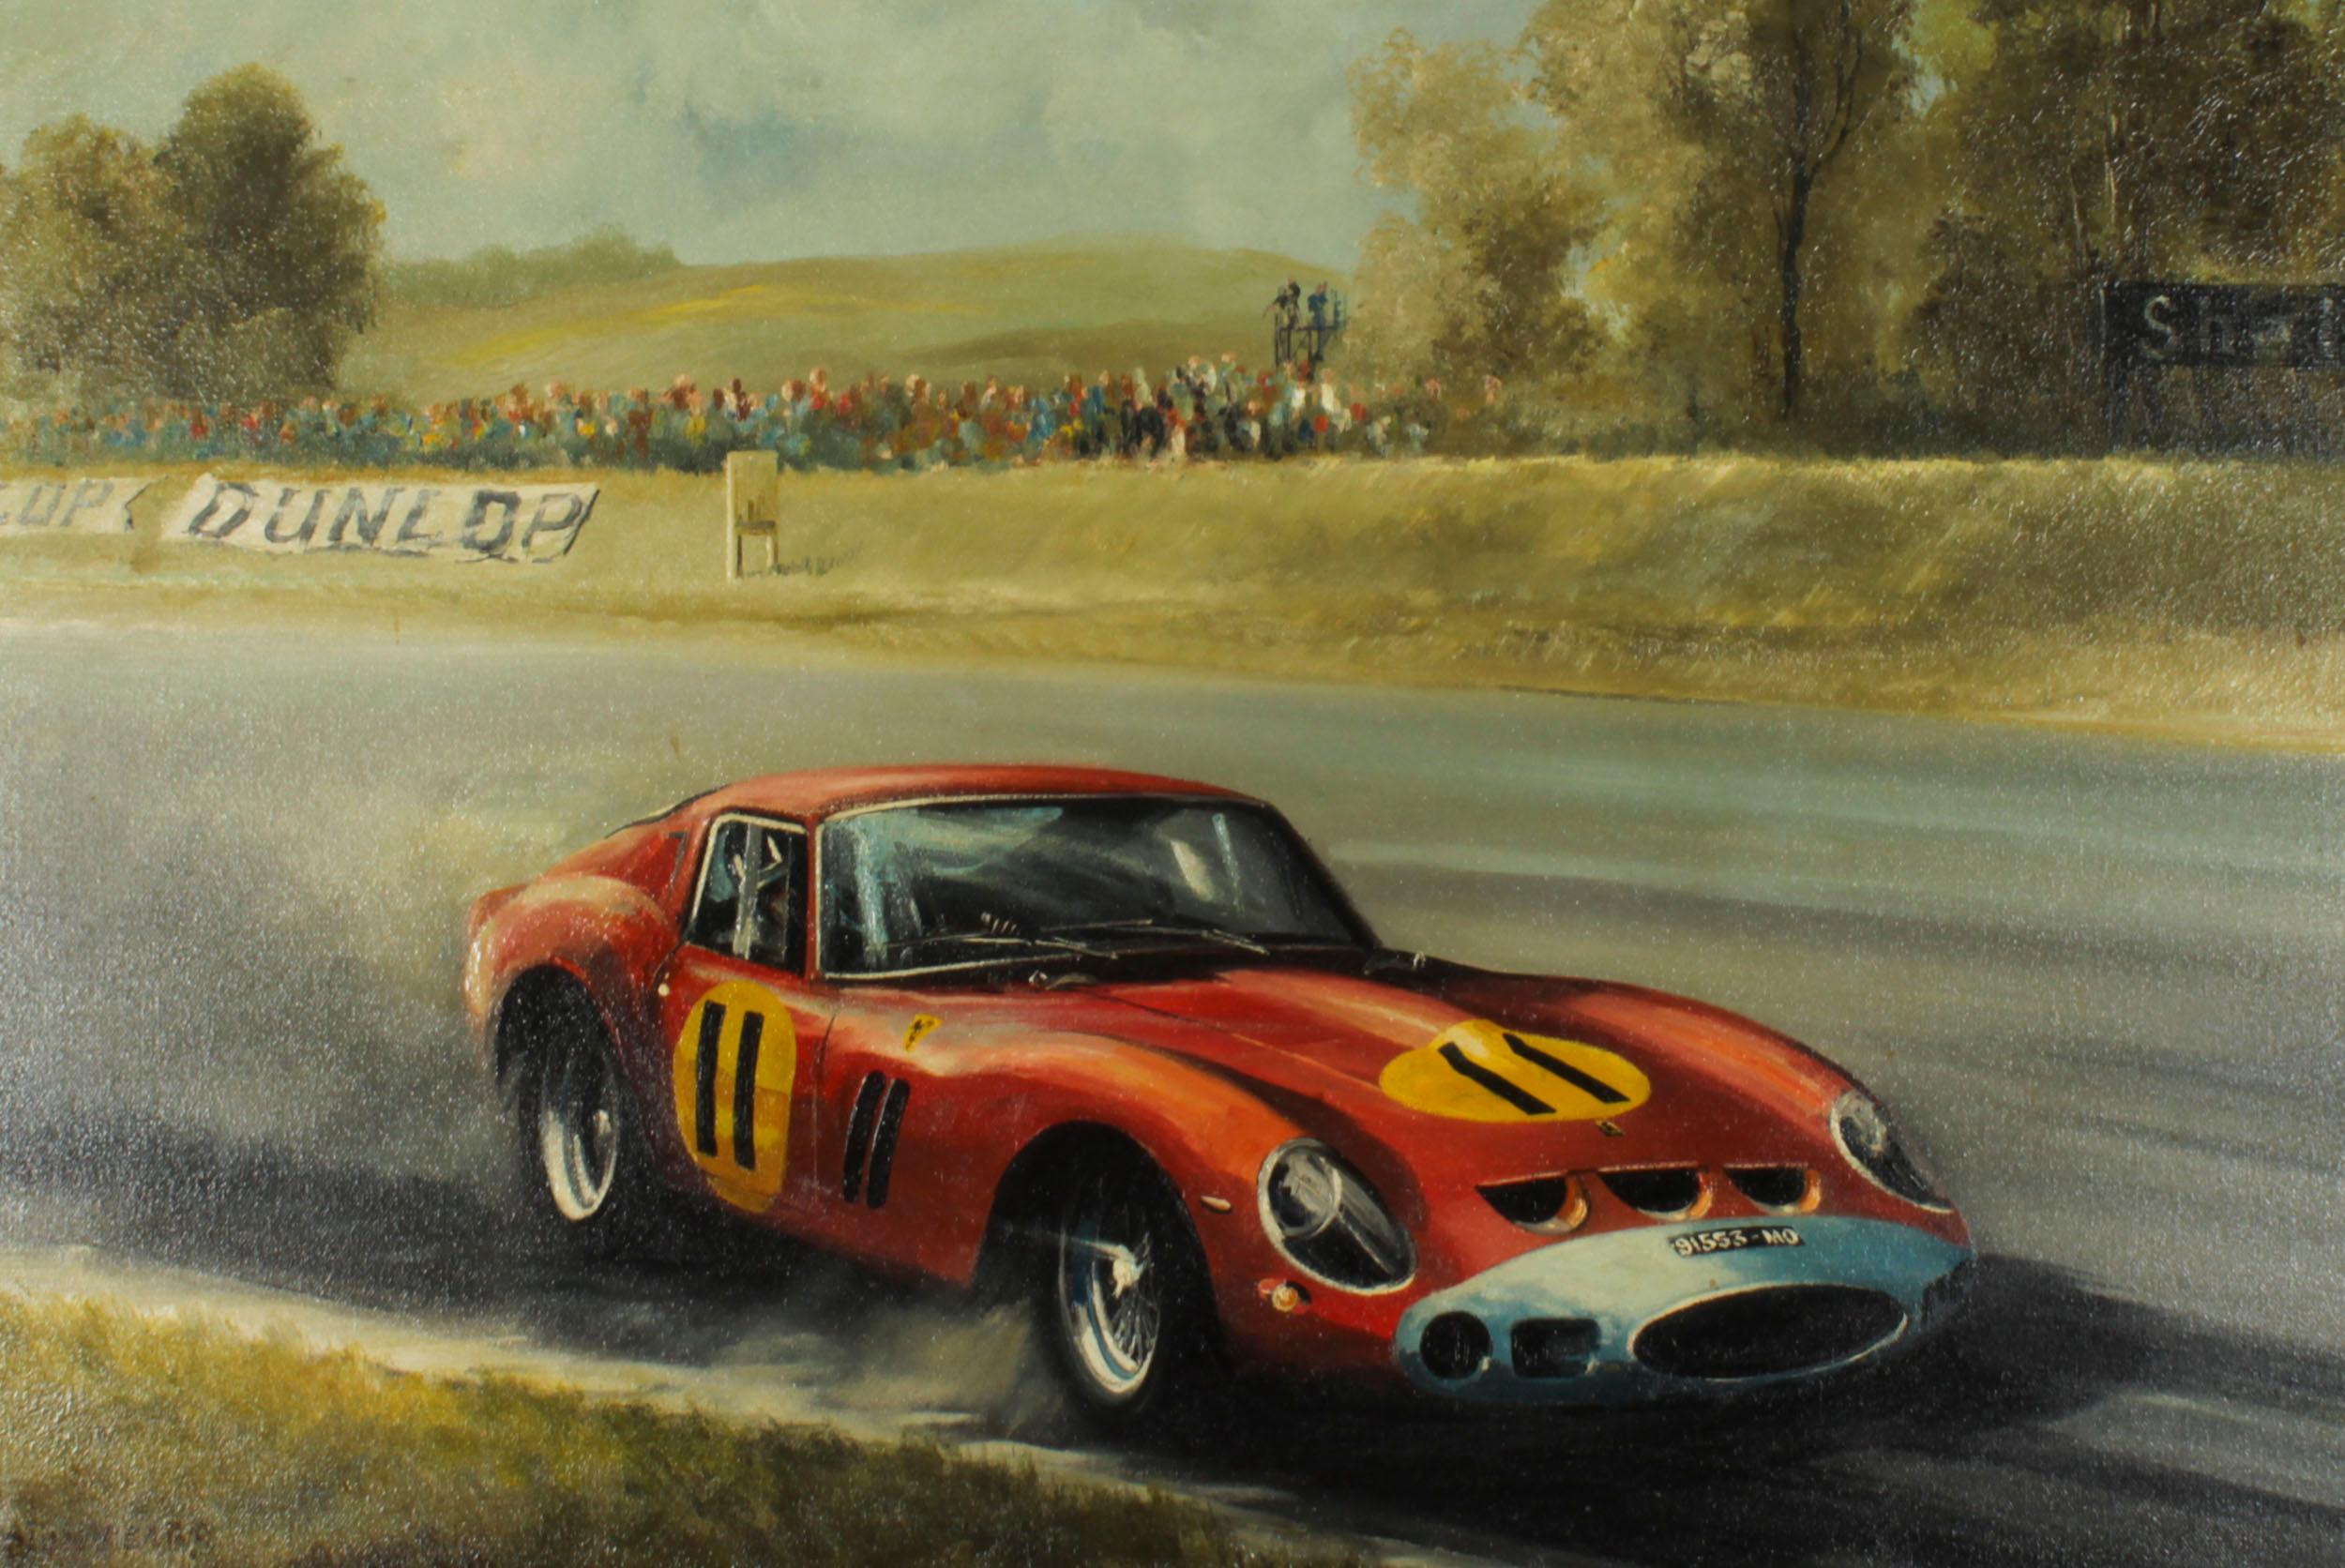 This is a Dion Pears (1929-1985) original oil on canvas artwork, signed lower left by the artist.

It depicts the John Surtees and Mike Parkes piloted Ferrari 250 GTO competing at the 1962 Paris 1000 km race. The pairing finished the race in second